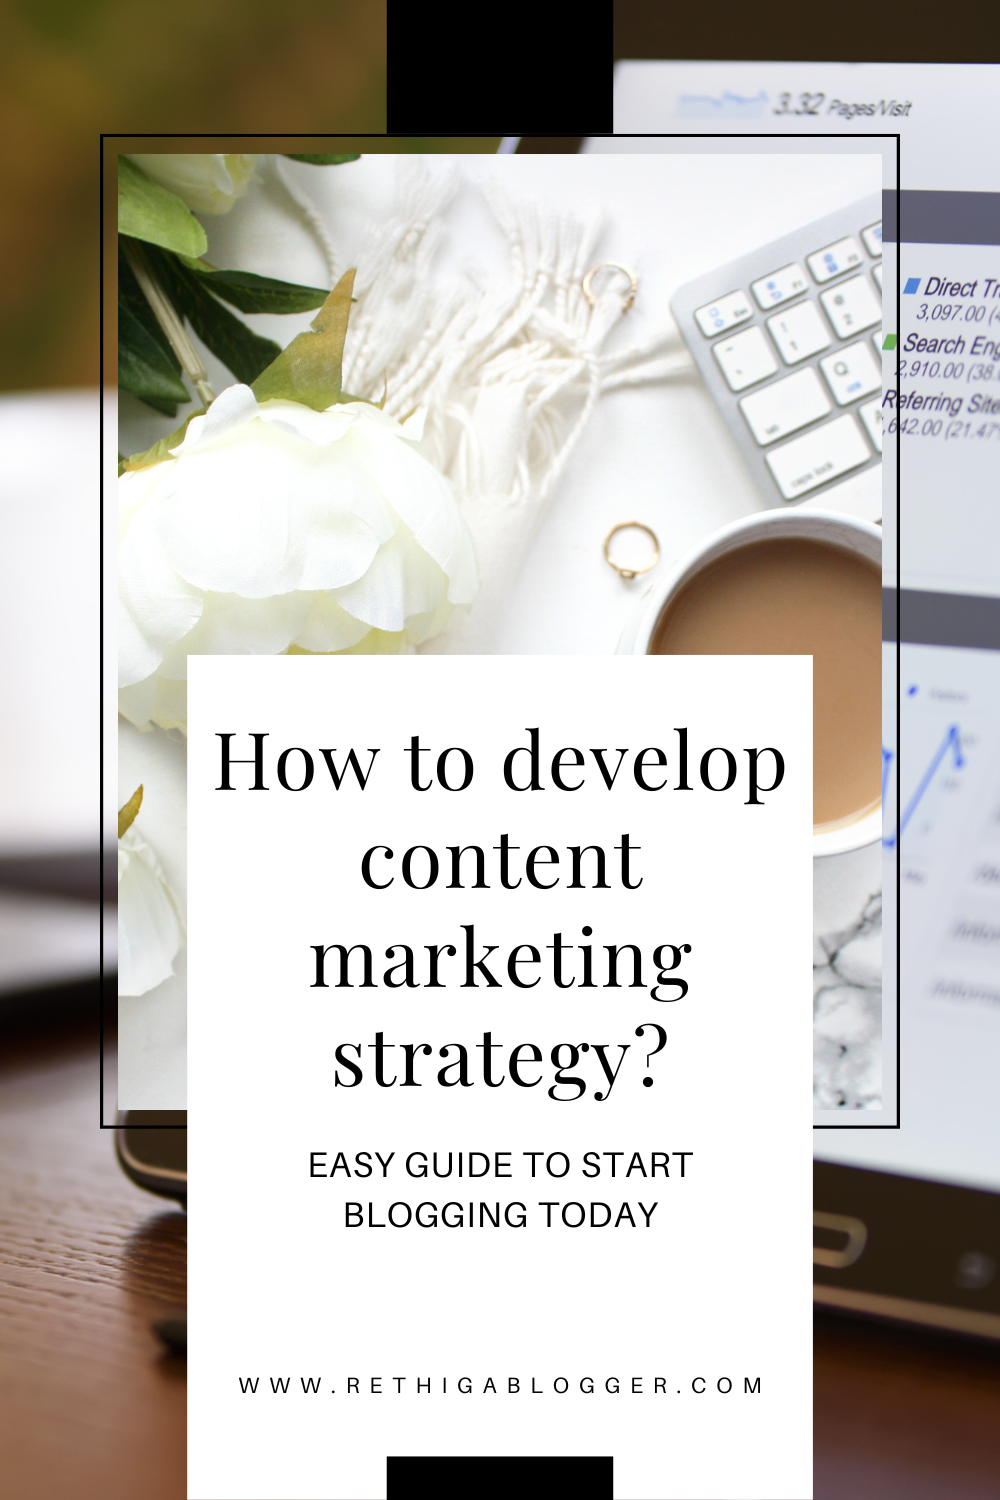 How to develop content marketing strategy?